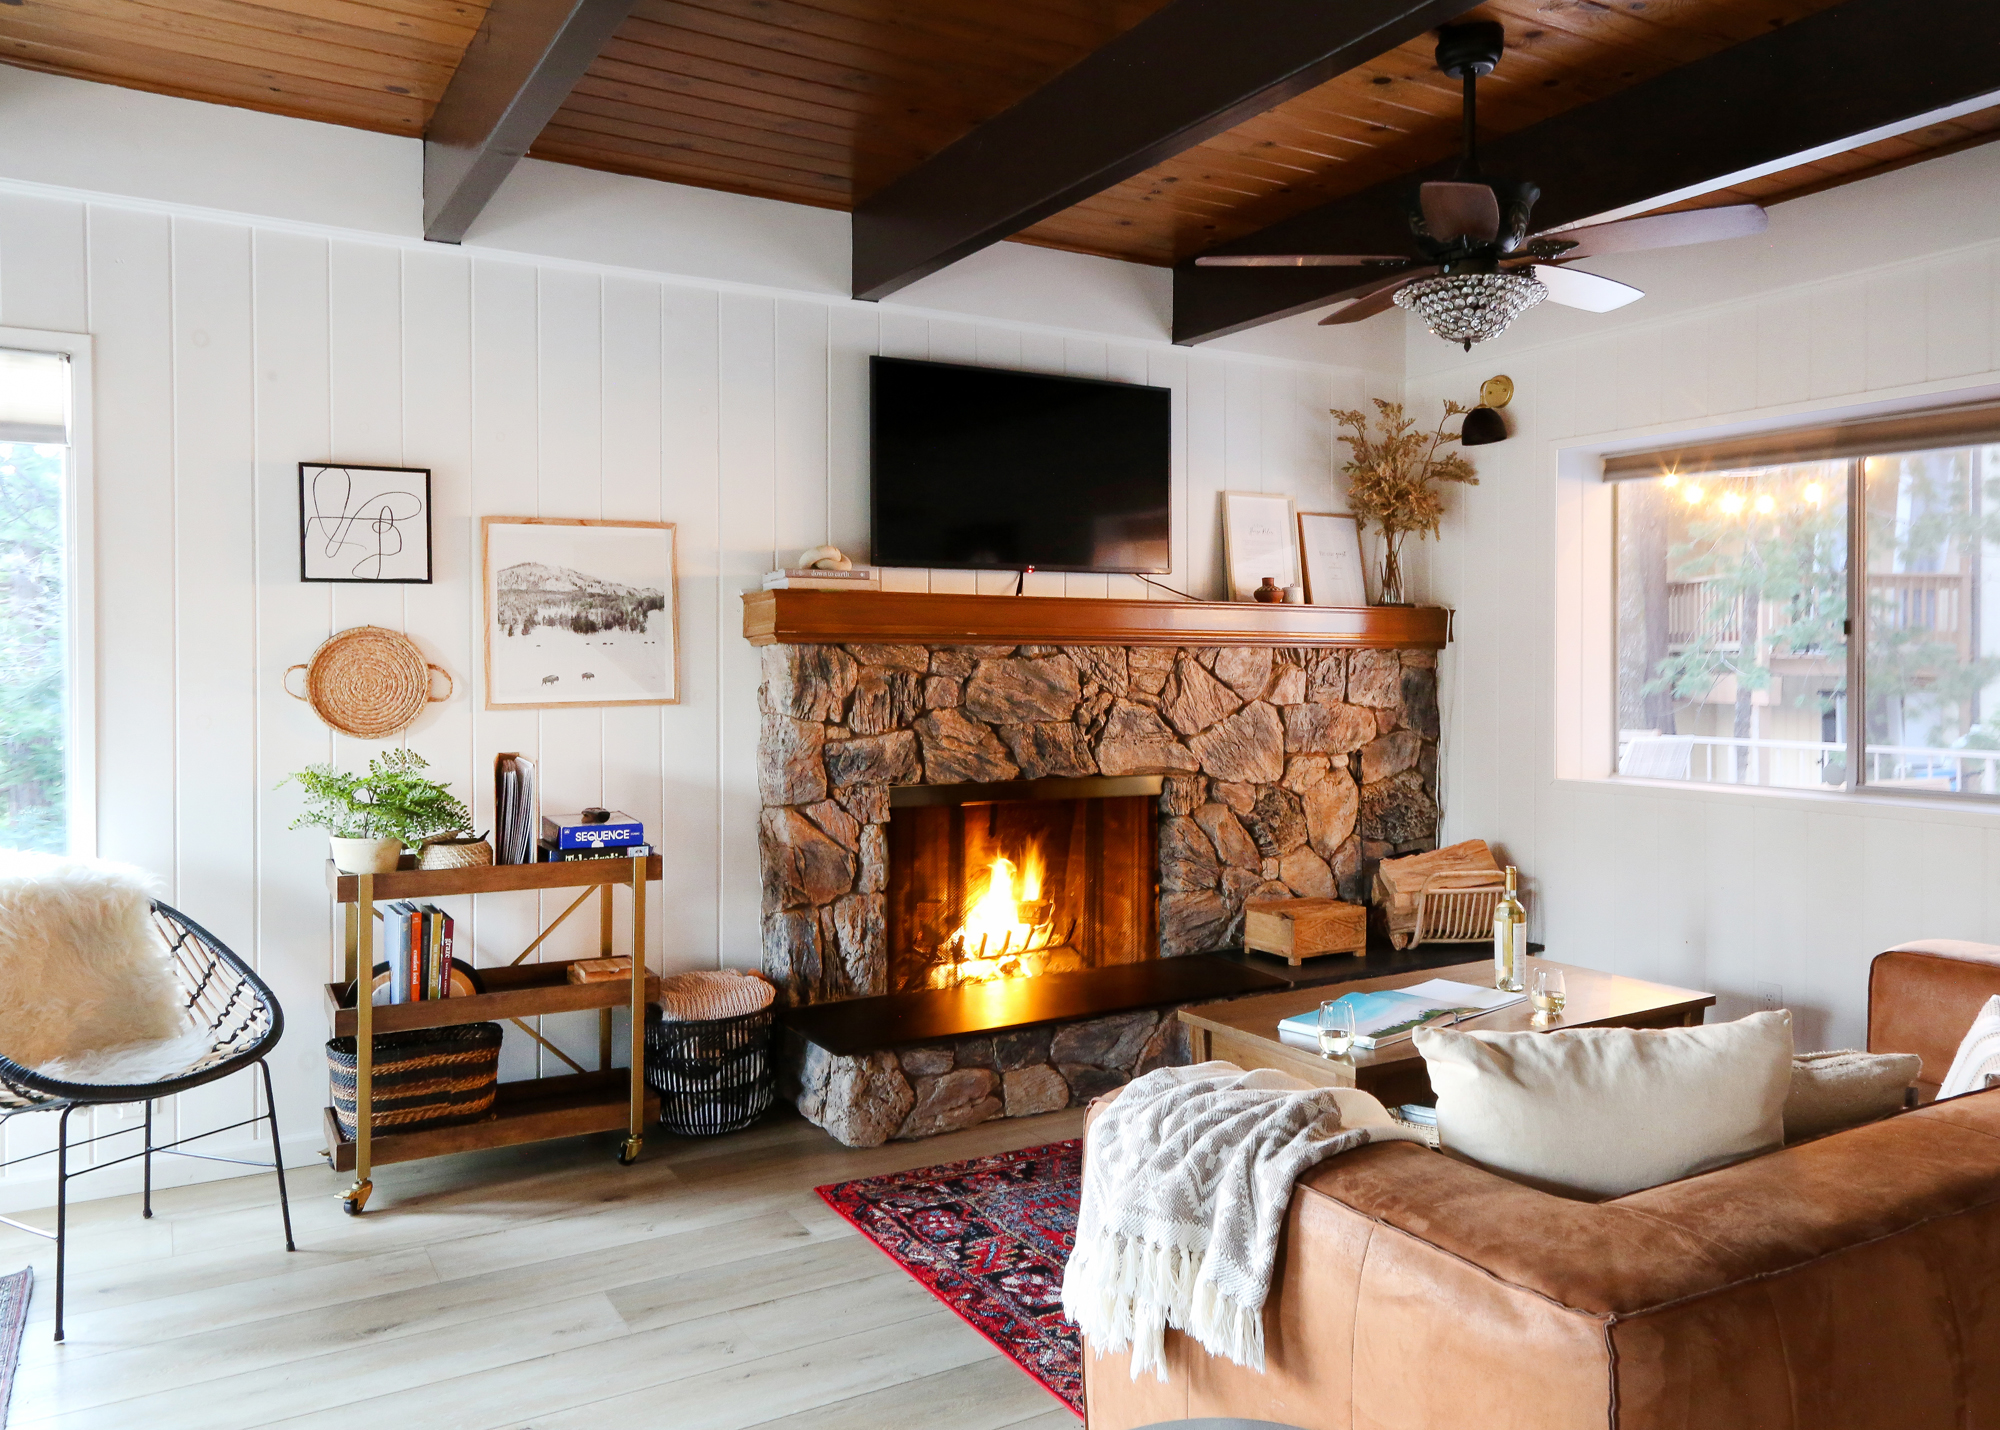 Interior view of a living room with large stone fireplace of Casa Cabina cabin rental in Lake Arrowhead, California.